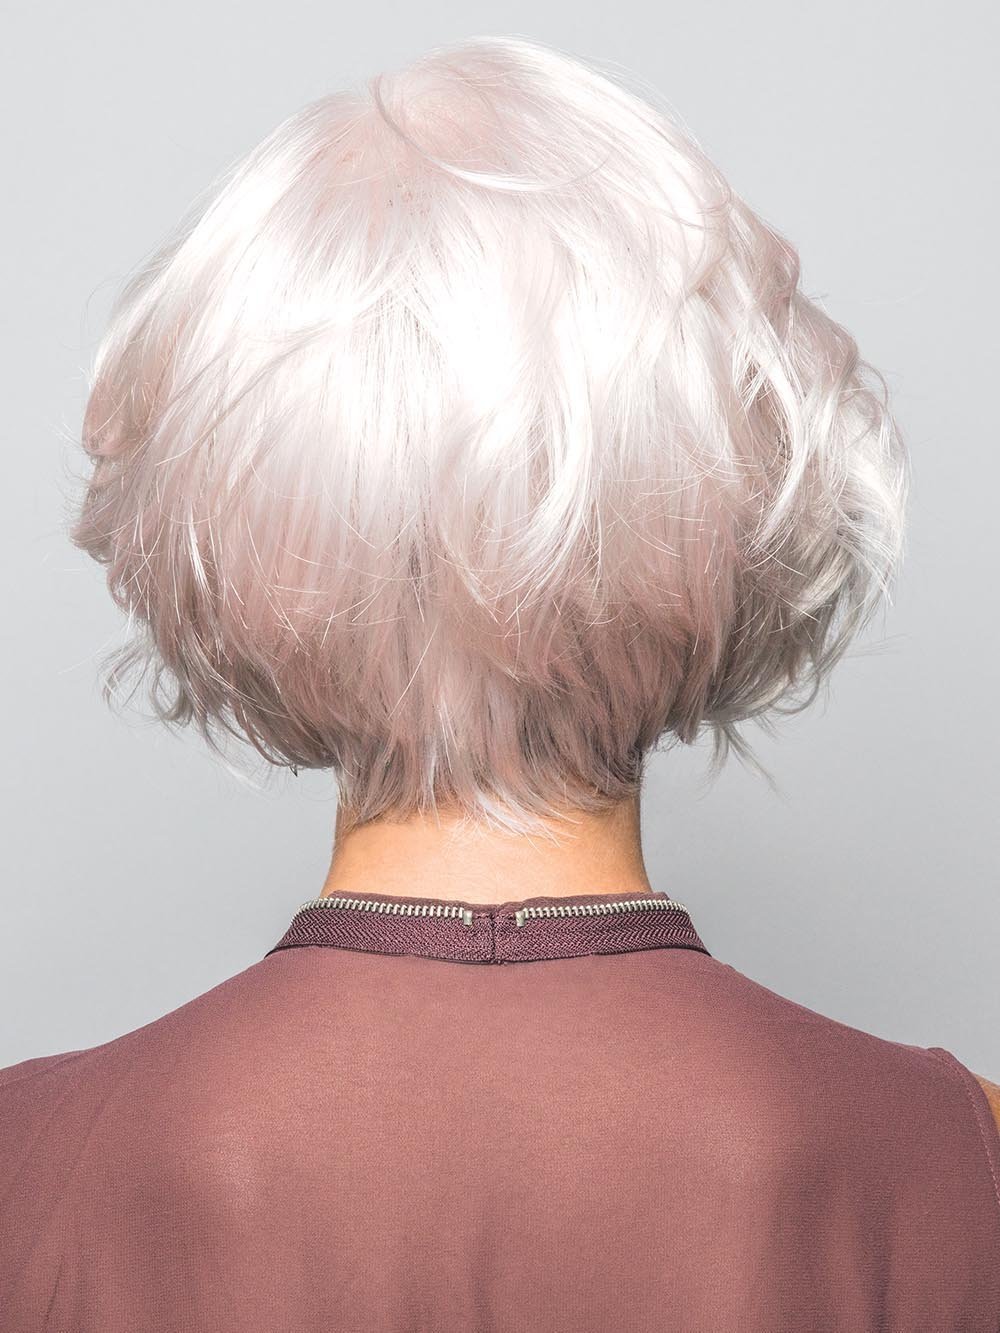 Beautiful nape line, that is sure to turn heads